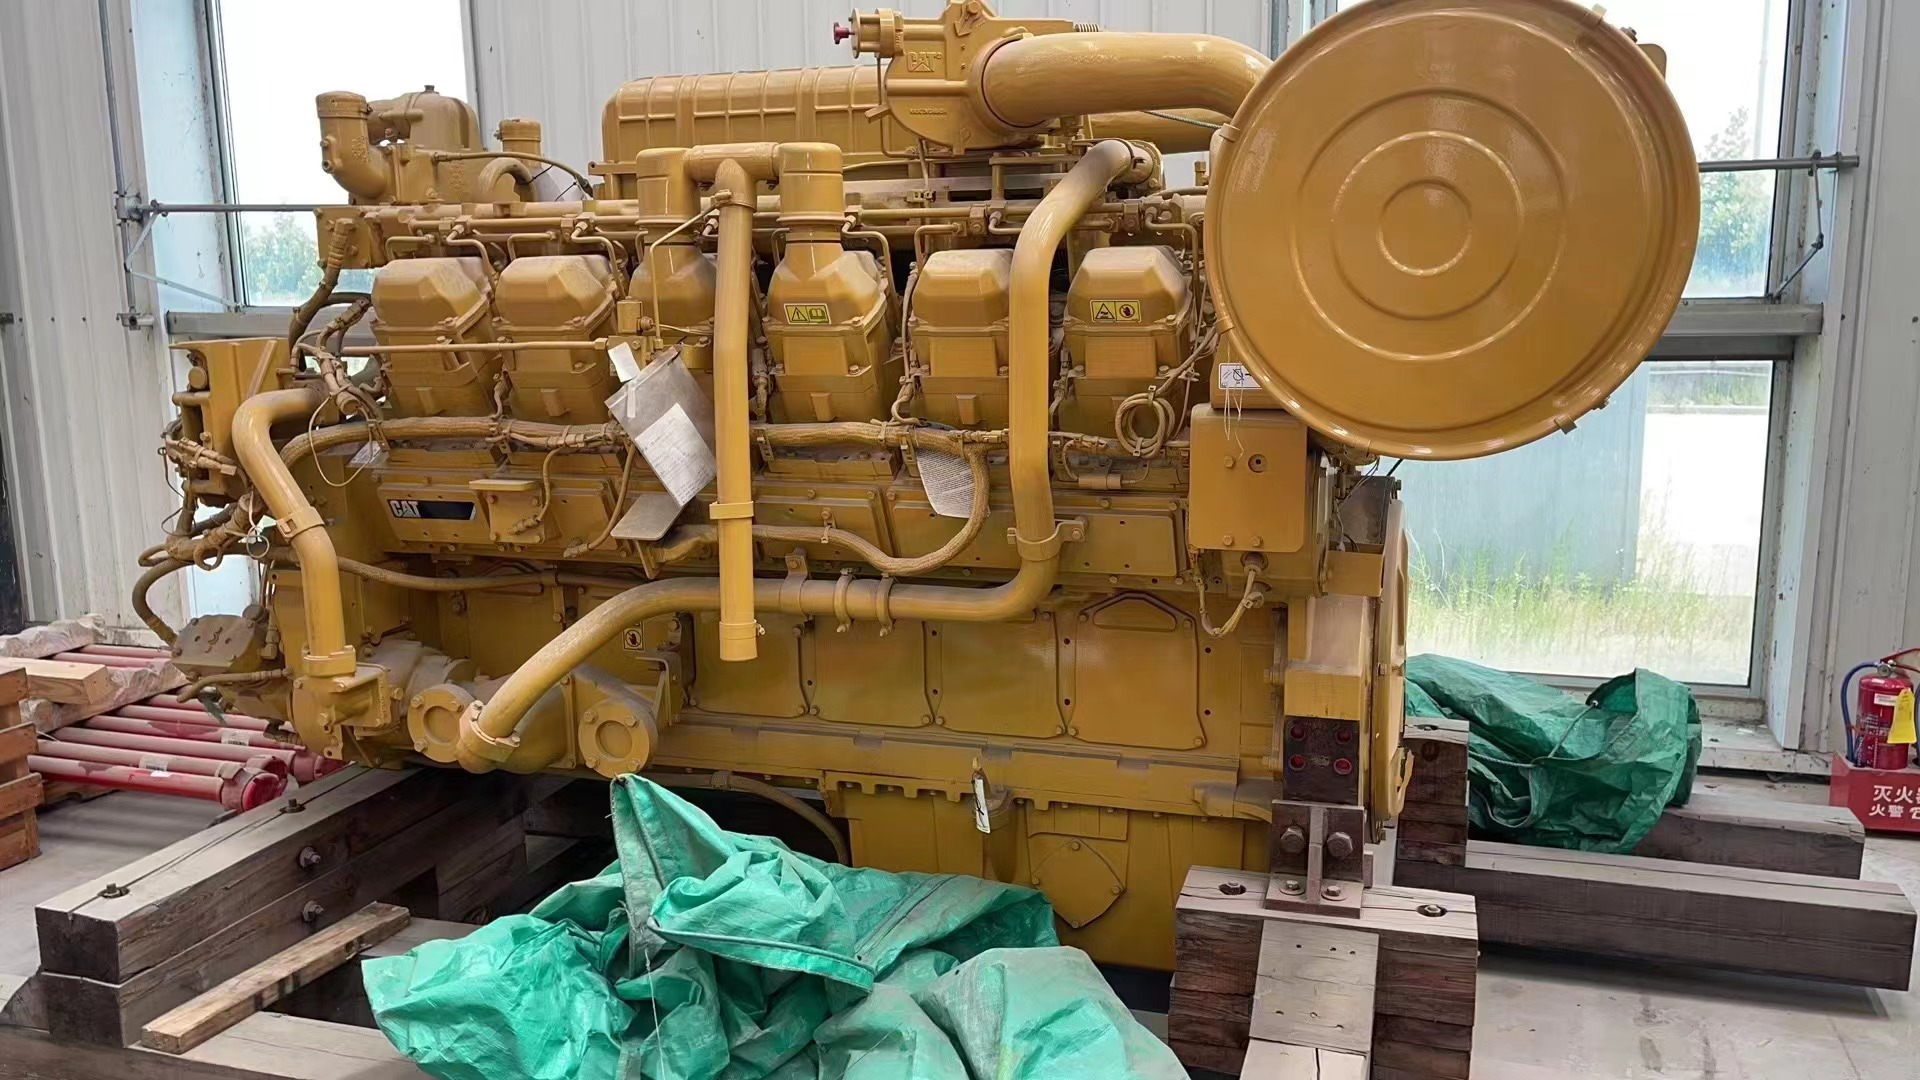 CAT 3512B 2250HP 1900RPM OIL WELL FRACTURING ENGINE SURPLUS NEW-2018